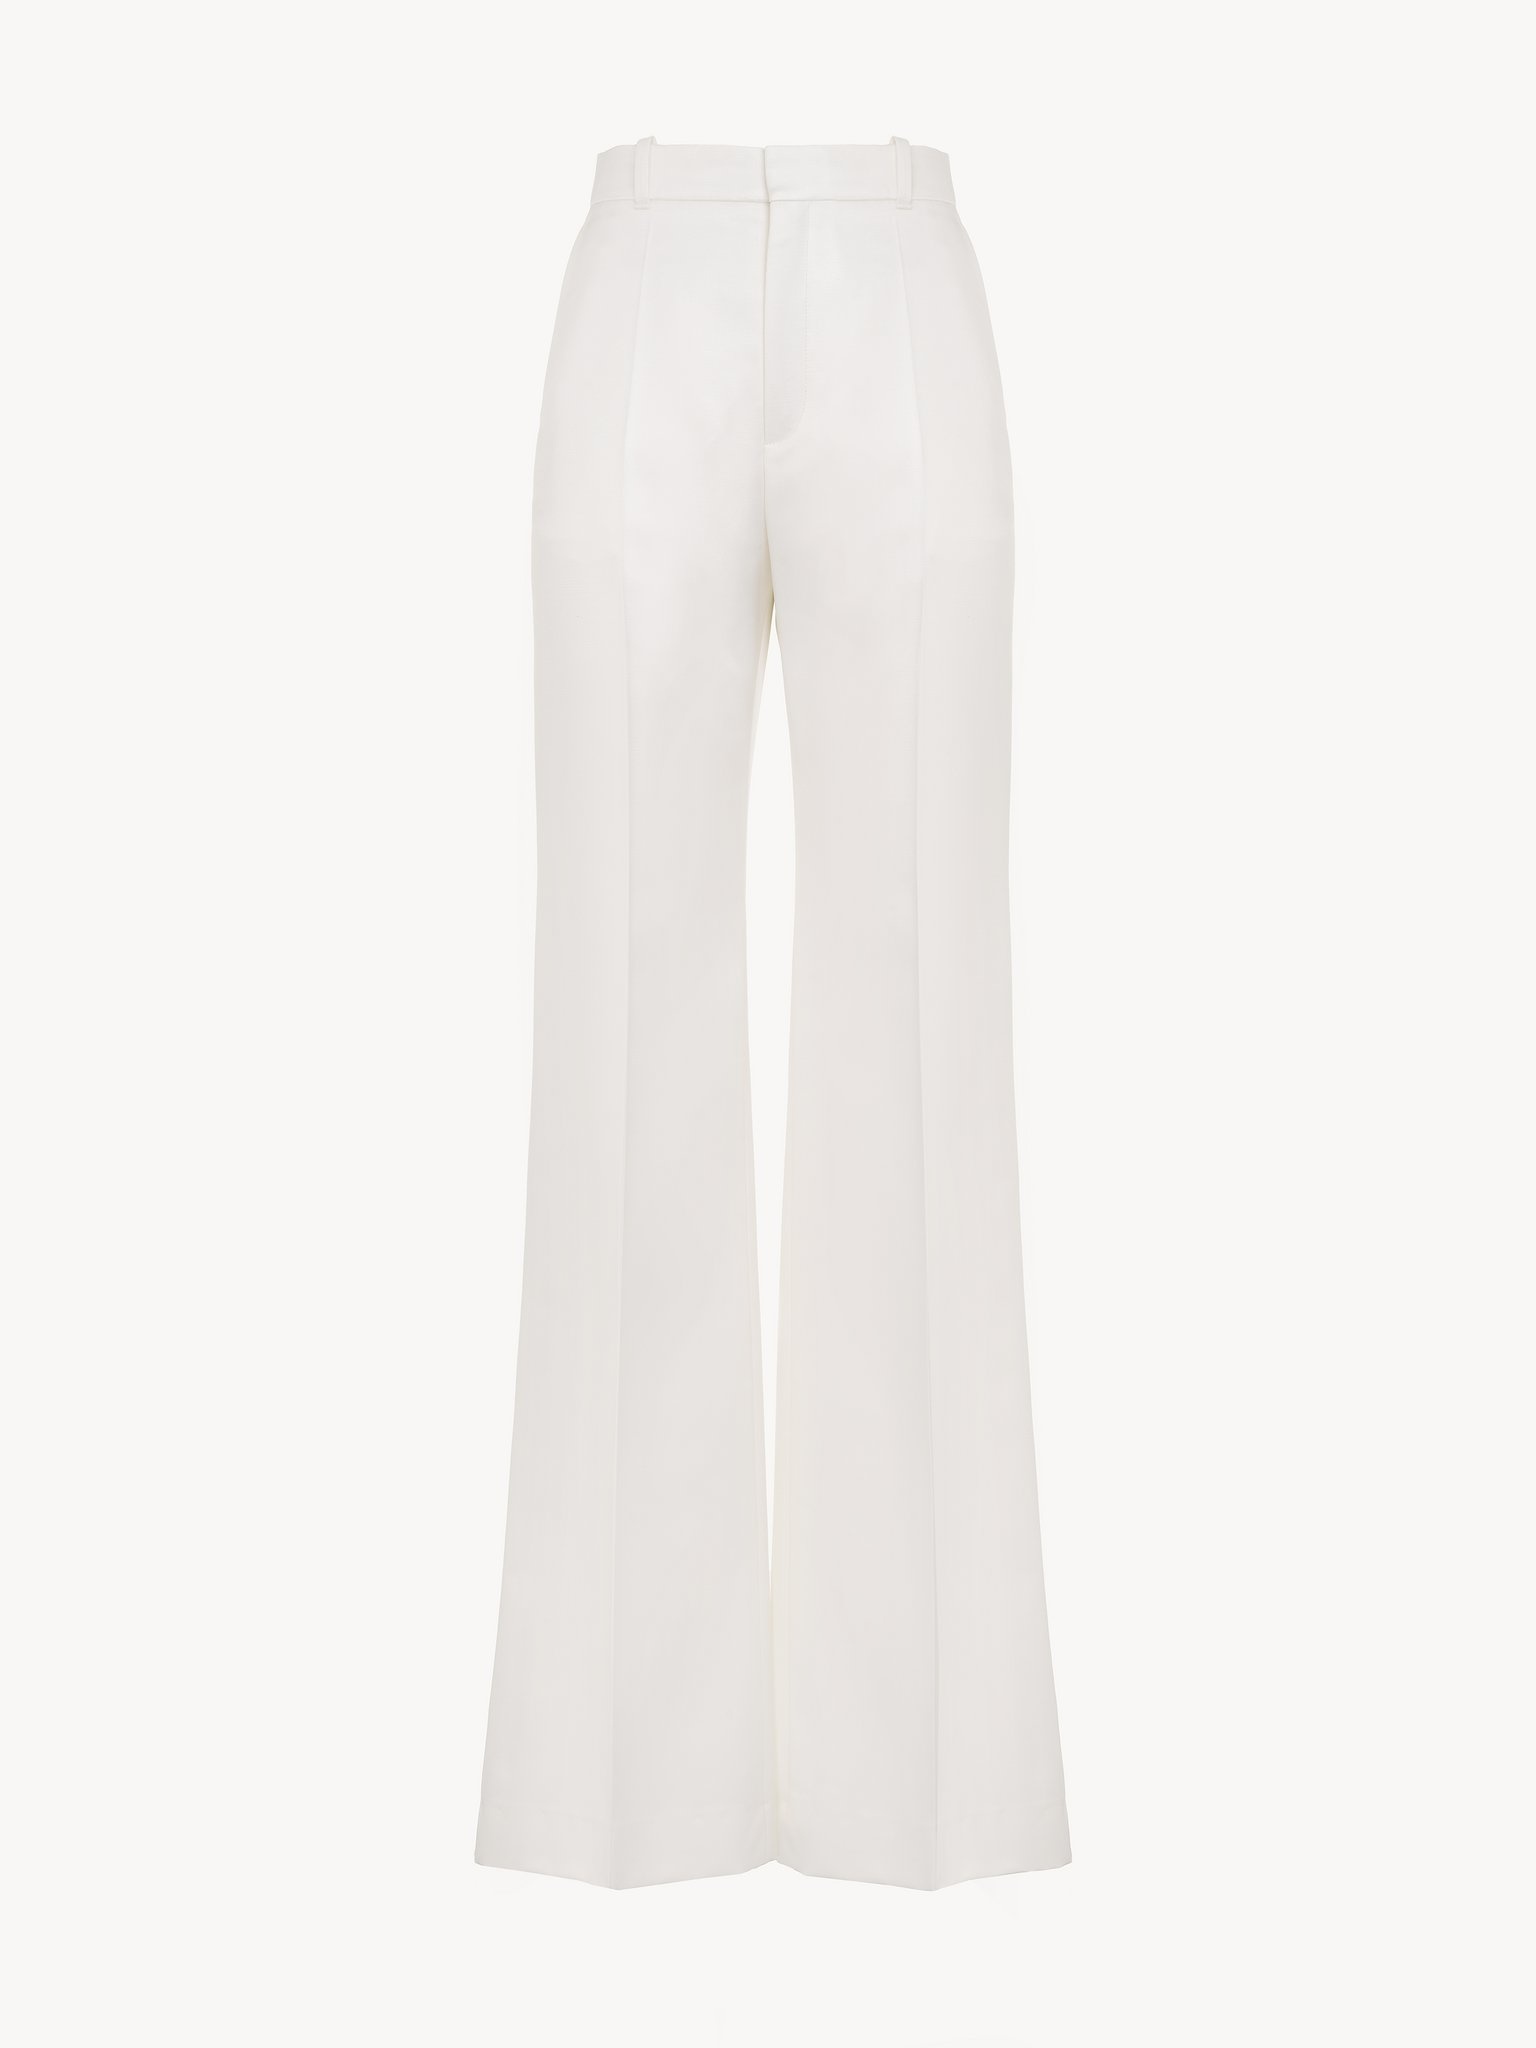 HIGH-RISE TAILORED PANTS - 2